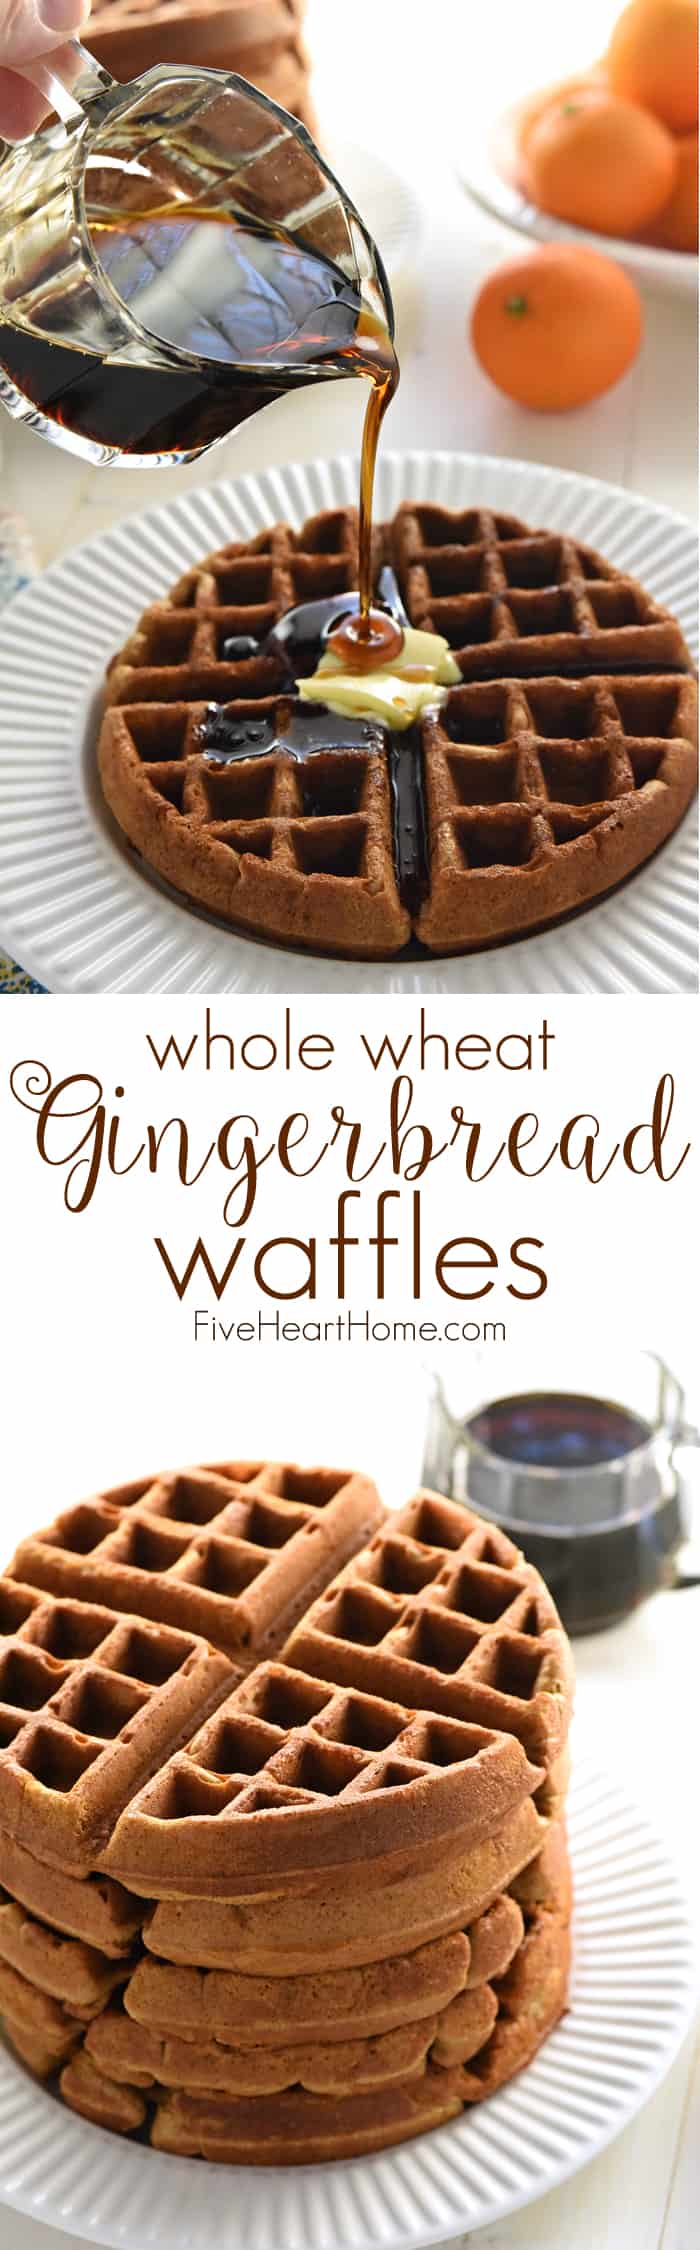 Whole Wheat Gingerbread Waffles ~ tender, fluffy, and perfectly spiced, these wholesome waffles make a festive holiday (or any day) breakfast! | FiveHeartHome.com via @fivehearthome